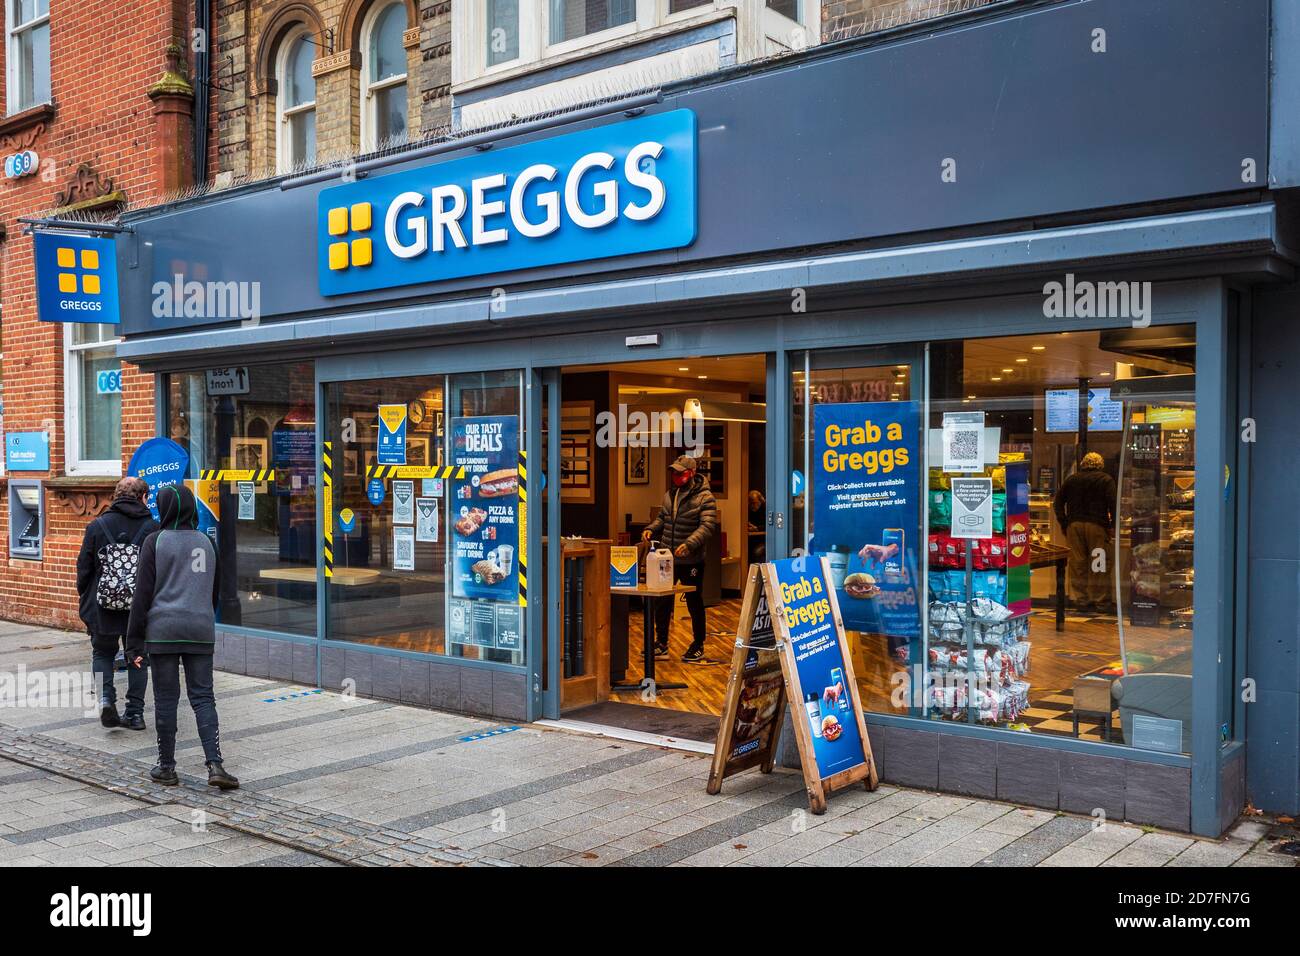 Greggs Bakery - Greggs Cafe and Bakery Food Store in Felixstowe Royaume-Uni Banque D'Images